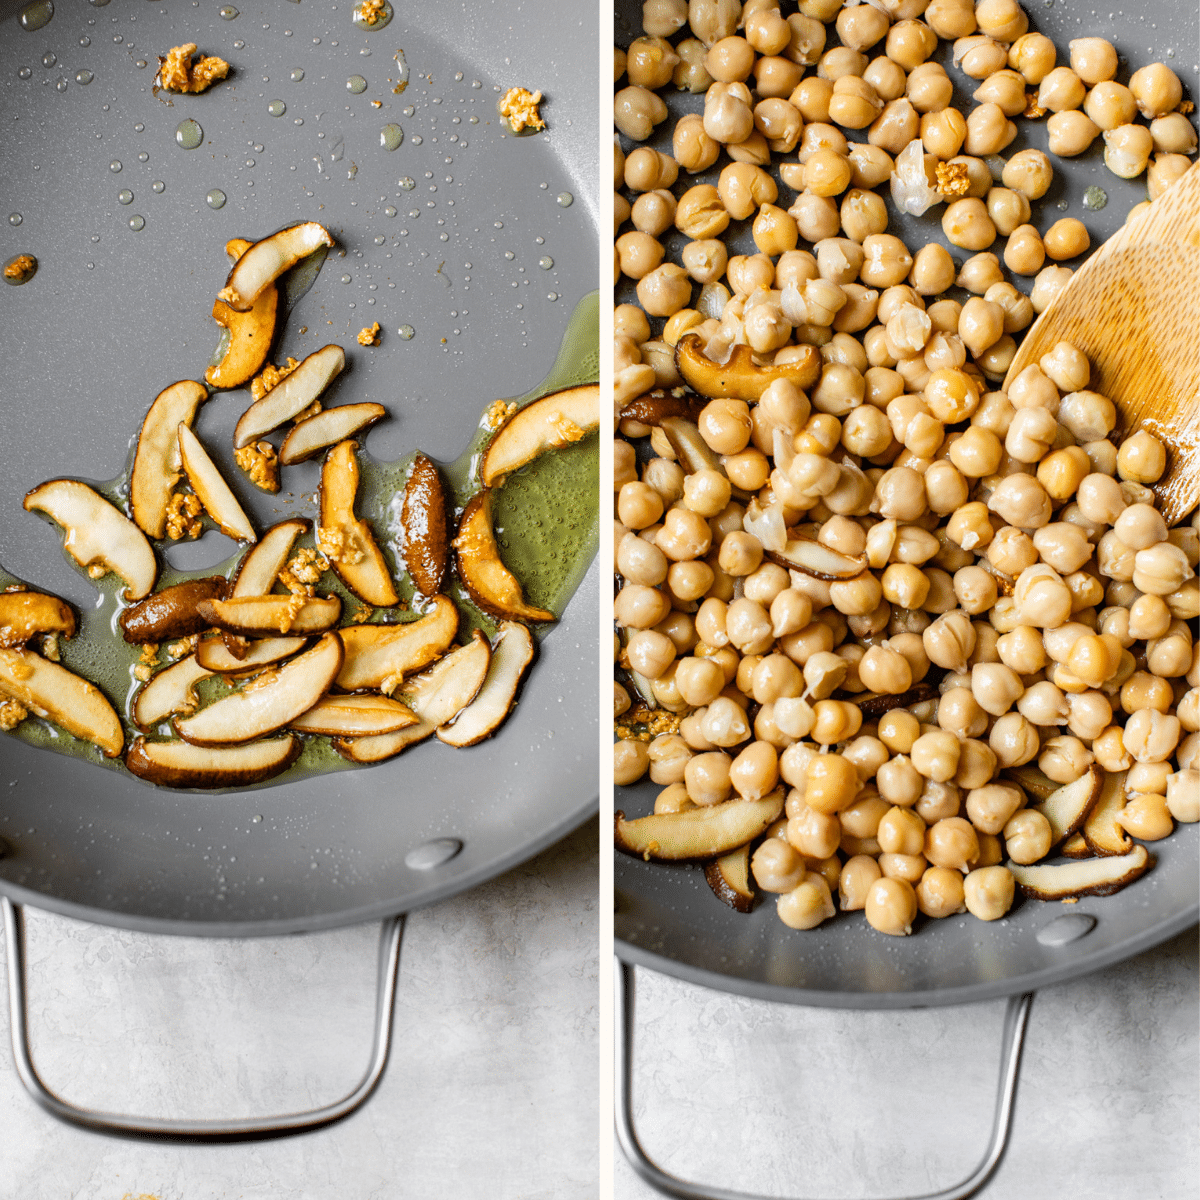 mushrooms and chickpeas in a skillet